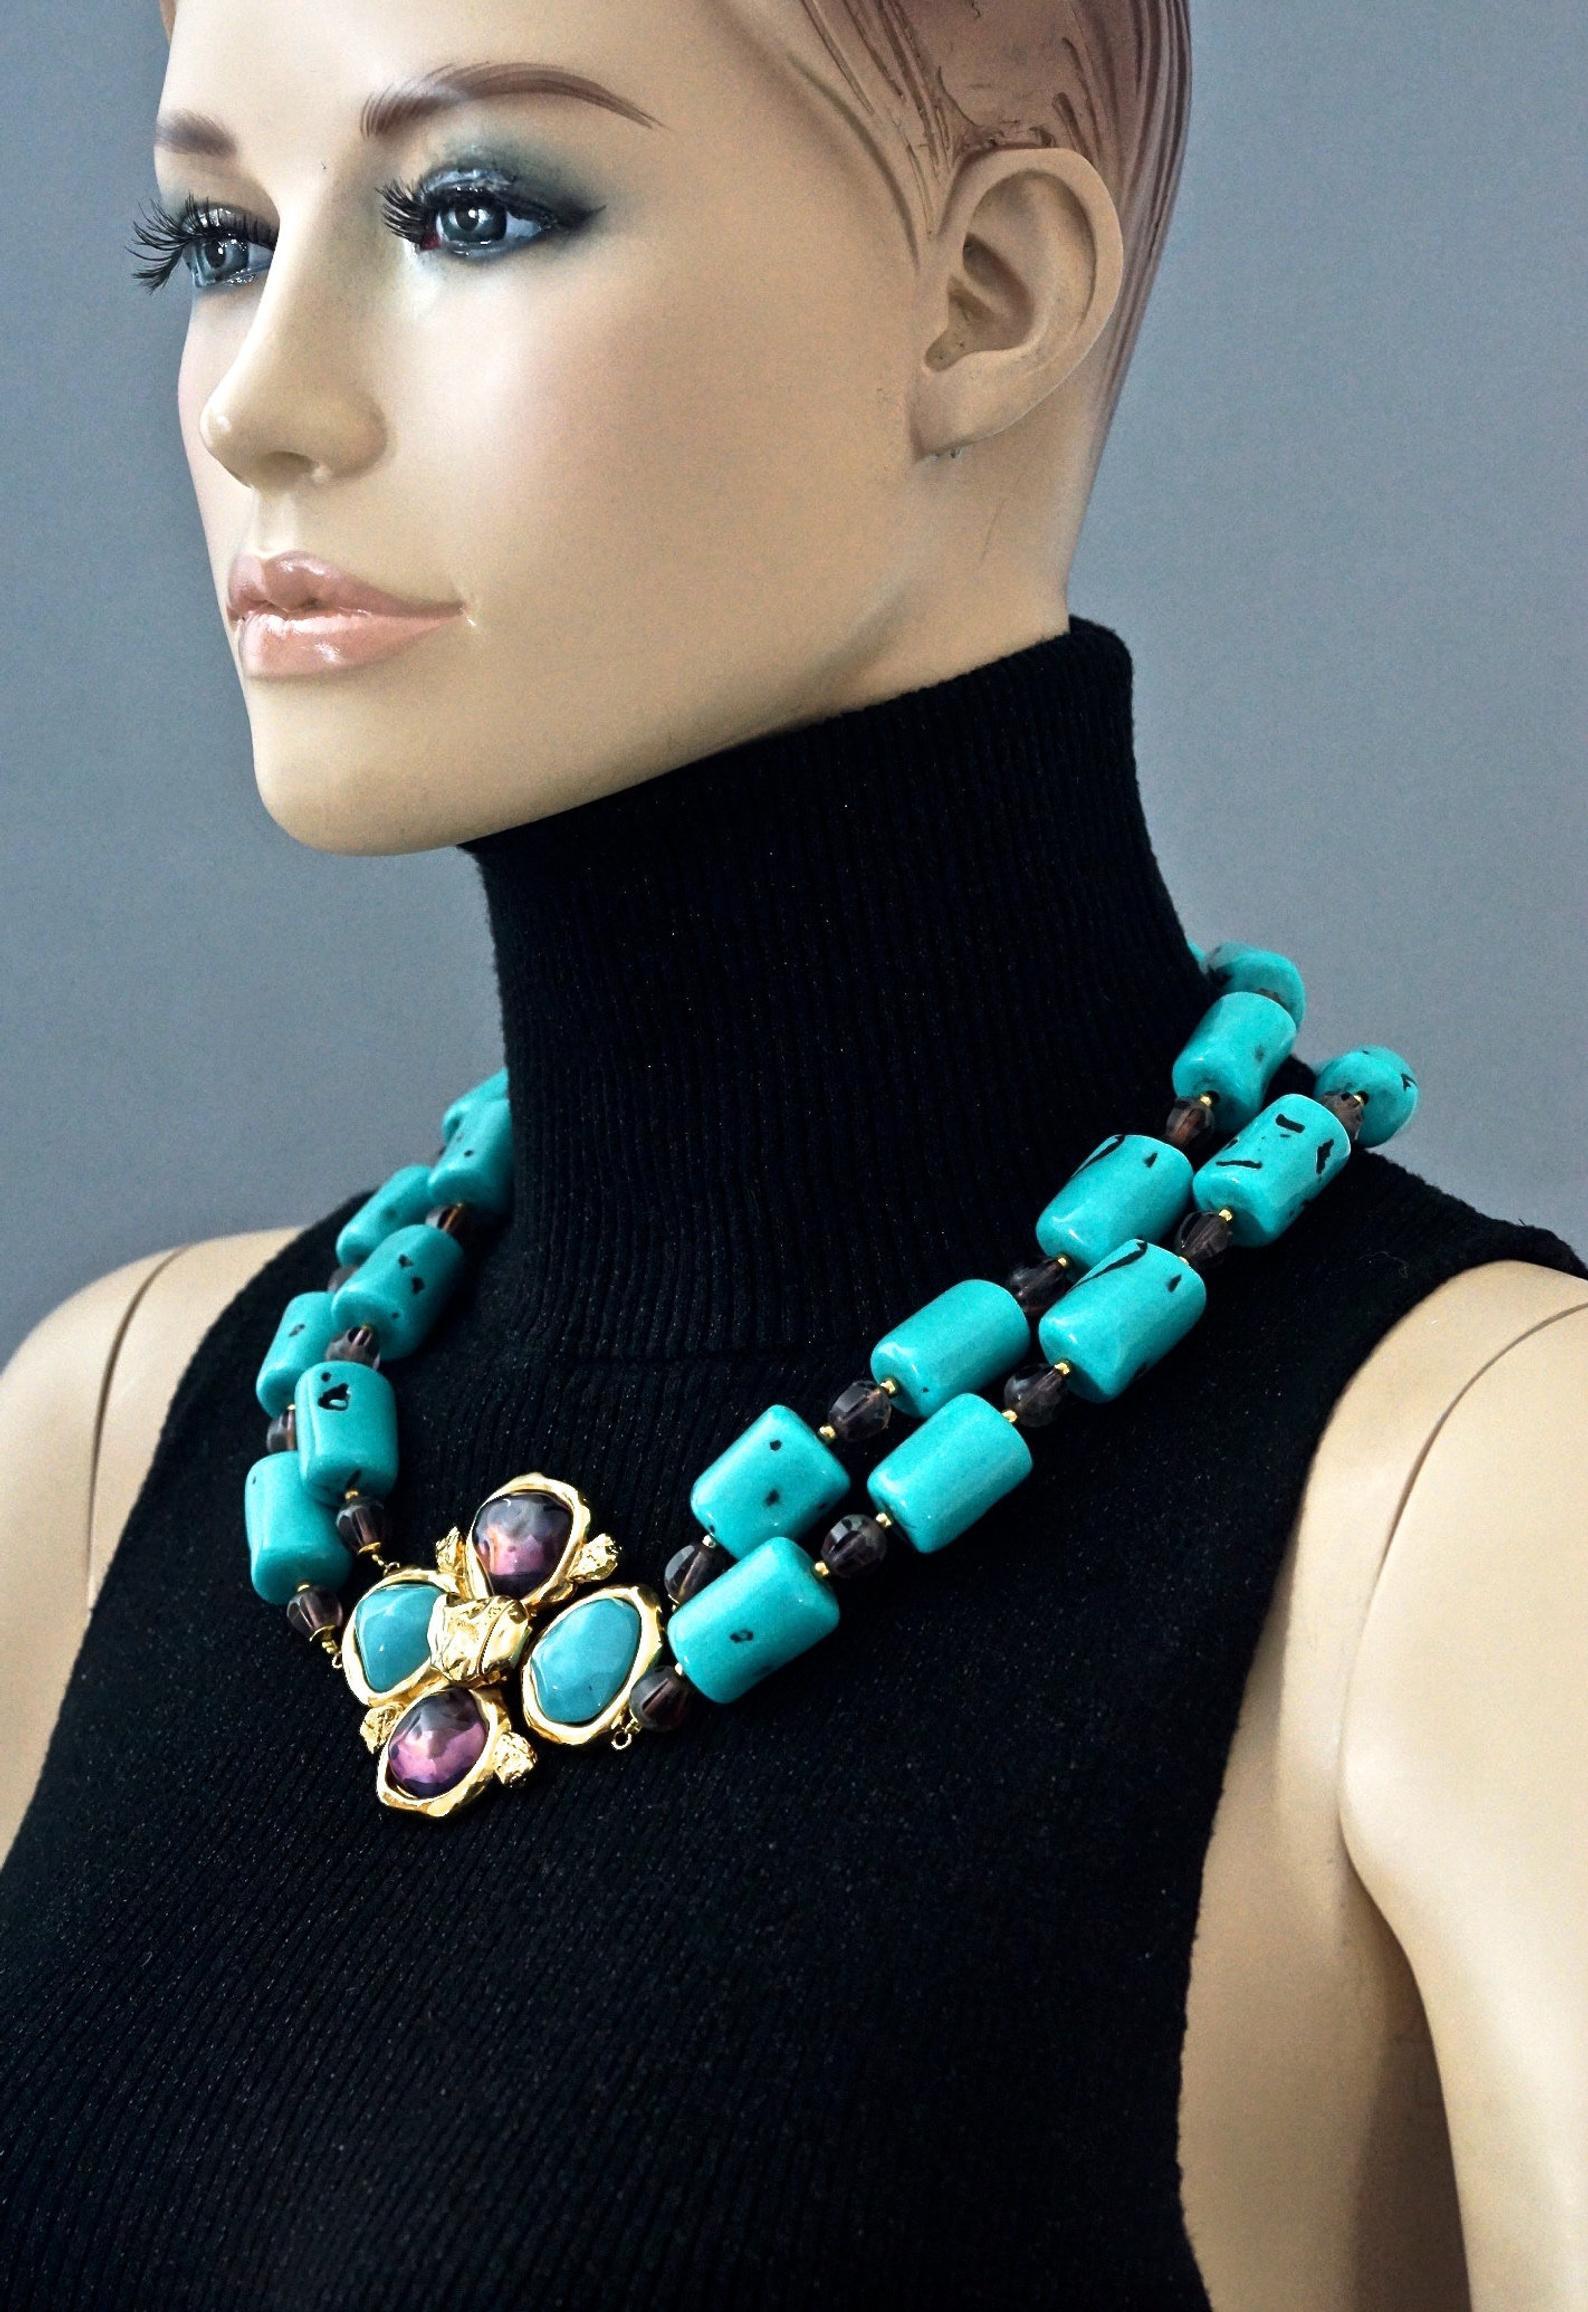 Vintage YVES SAINT LAURENT Ysl by Robert Goossens Flower Nugget Turquoise Necklace

Measurements:
Height: 2.44 inches (6.2 cm)
Wearable Length: 22.04 inches (56 cm)

Features:
- 100% Authentic YVES SAINT LAURENT by Robert Goossens.
- 2 Layer ceramic